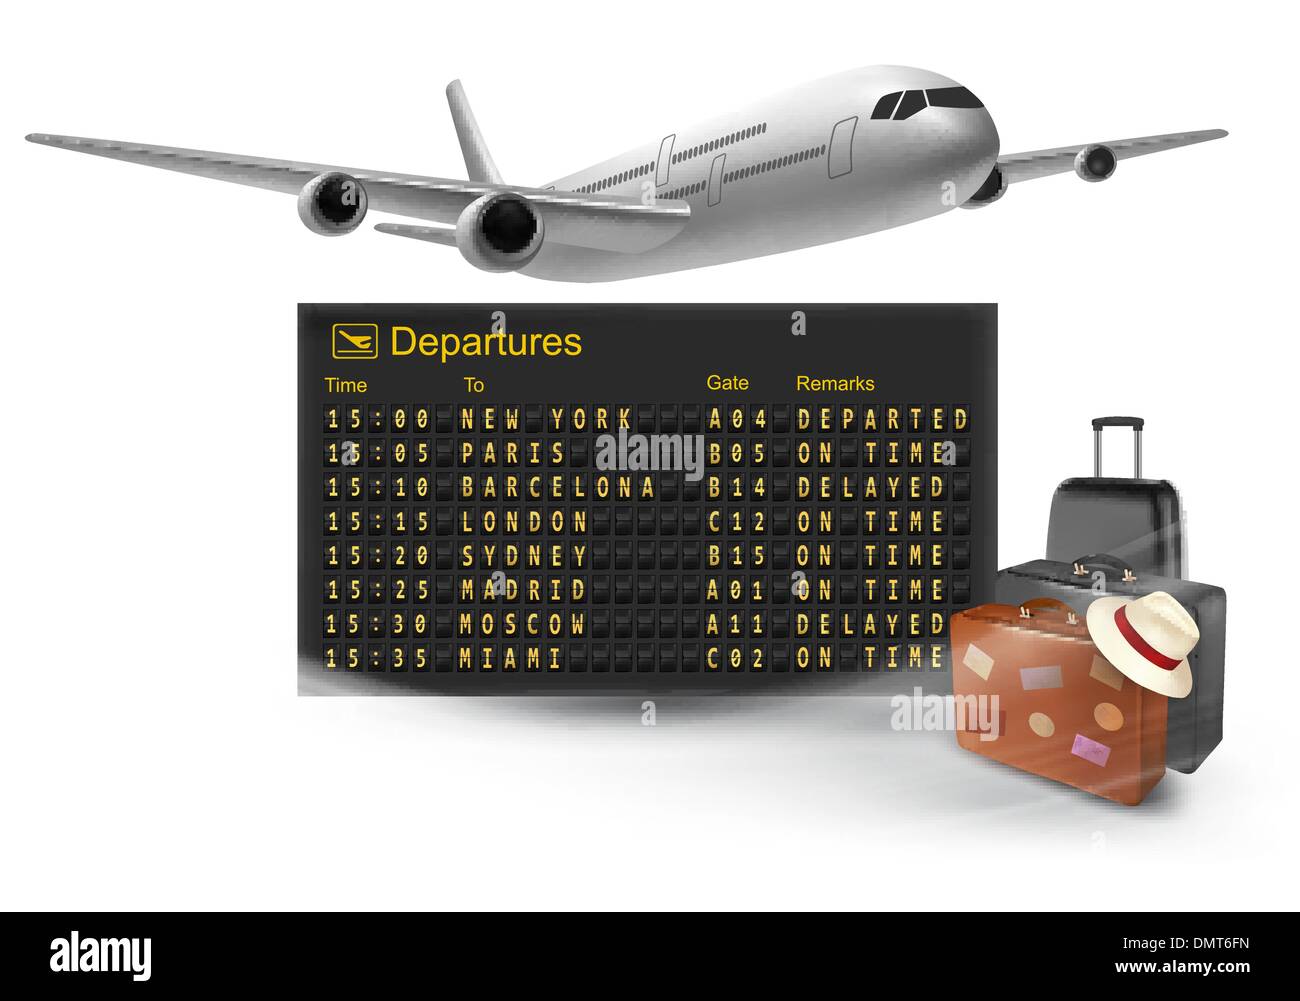 Travel background with mechanical departures board and airline. Stock Vector